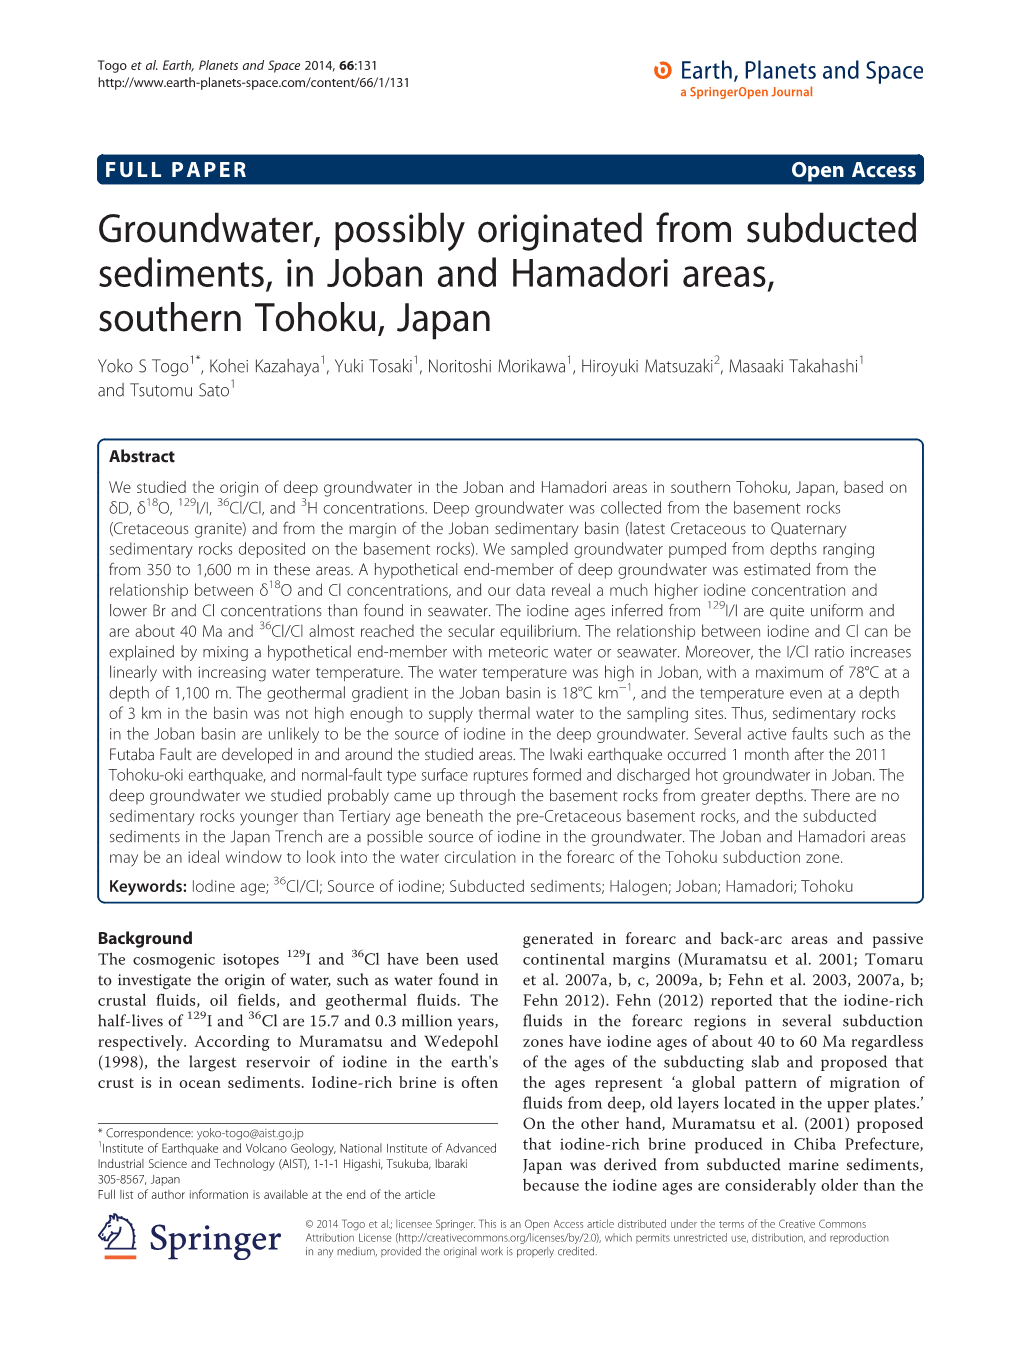 Groundwater, Possibly Originated from Subducted Sediments, in Joban